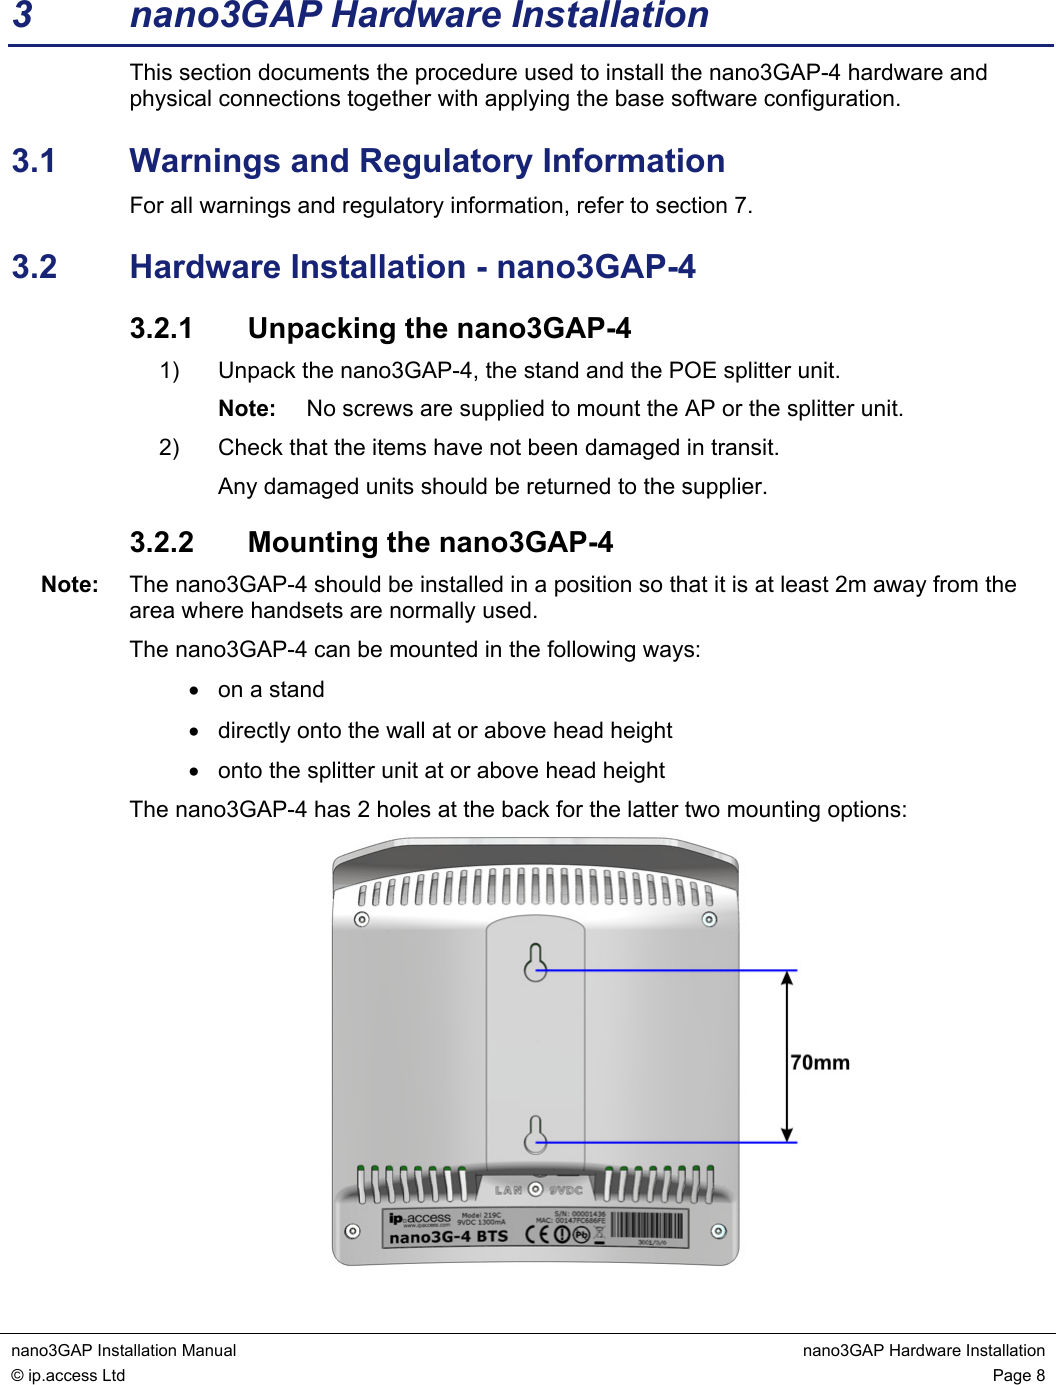  nano3GAP Installation Manual  nano3GAP Hardware Installation © ip.access Ltd  Page 8  3  nano3GAP Hardware Installation This section documents the procedure used to install the nano3GAP-4 hardware and physical connections together with applying the base software configuration. 3.1  Warnings and Regulatory Information For all warnings and regulatory information, refer to section 7. 3.2  Hardware Installation - nano3GAP-4 3.2.1  Unpacking the nano3GAP-4 1)  Unpack the nano3GAP-4, the stand and the POE splitter unit. Note:  No screws are supplied to mount the AP or the splitter unit. 2)  Check that the items have not been damaged in transit. Any damaged units should be returned to the supplier. 3.2.2  Mounting the nano3GAP-4 Note:  The nano3GAP-4 should be installed in a position so that it is at least 2m away from the area where handsets are normally used. The nano3GAP-4 can be mounted in the following ways: •  on a stand •  directly onto the wall at or above head height •  onto the splitter unit at or above head height The nano3GAP-4 has 2 holes at the back for the latter two mounting options:  